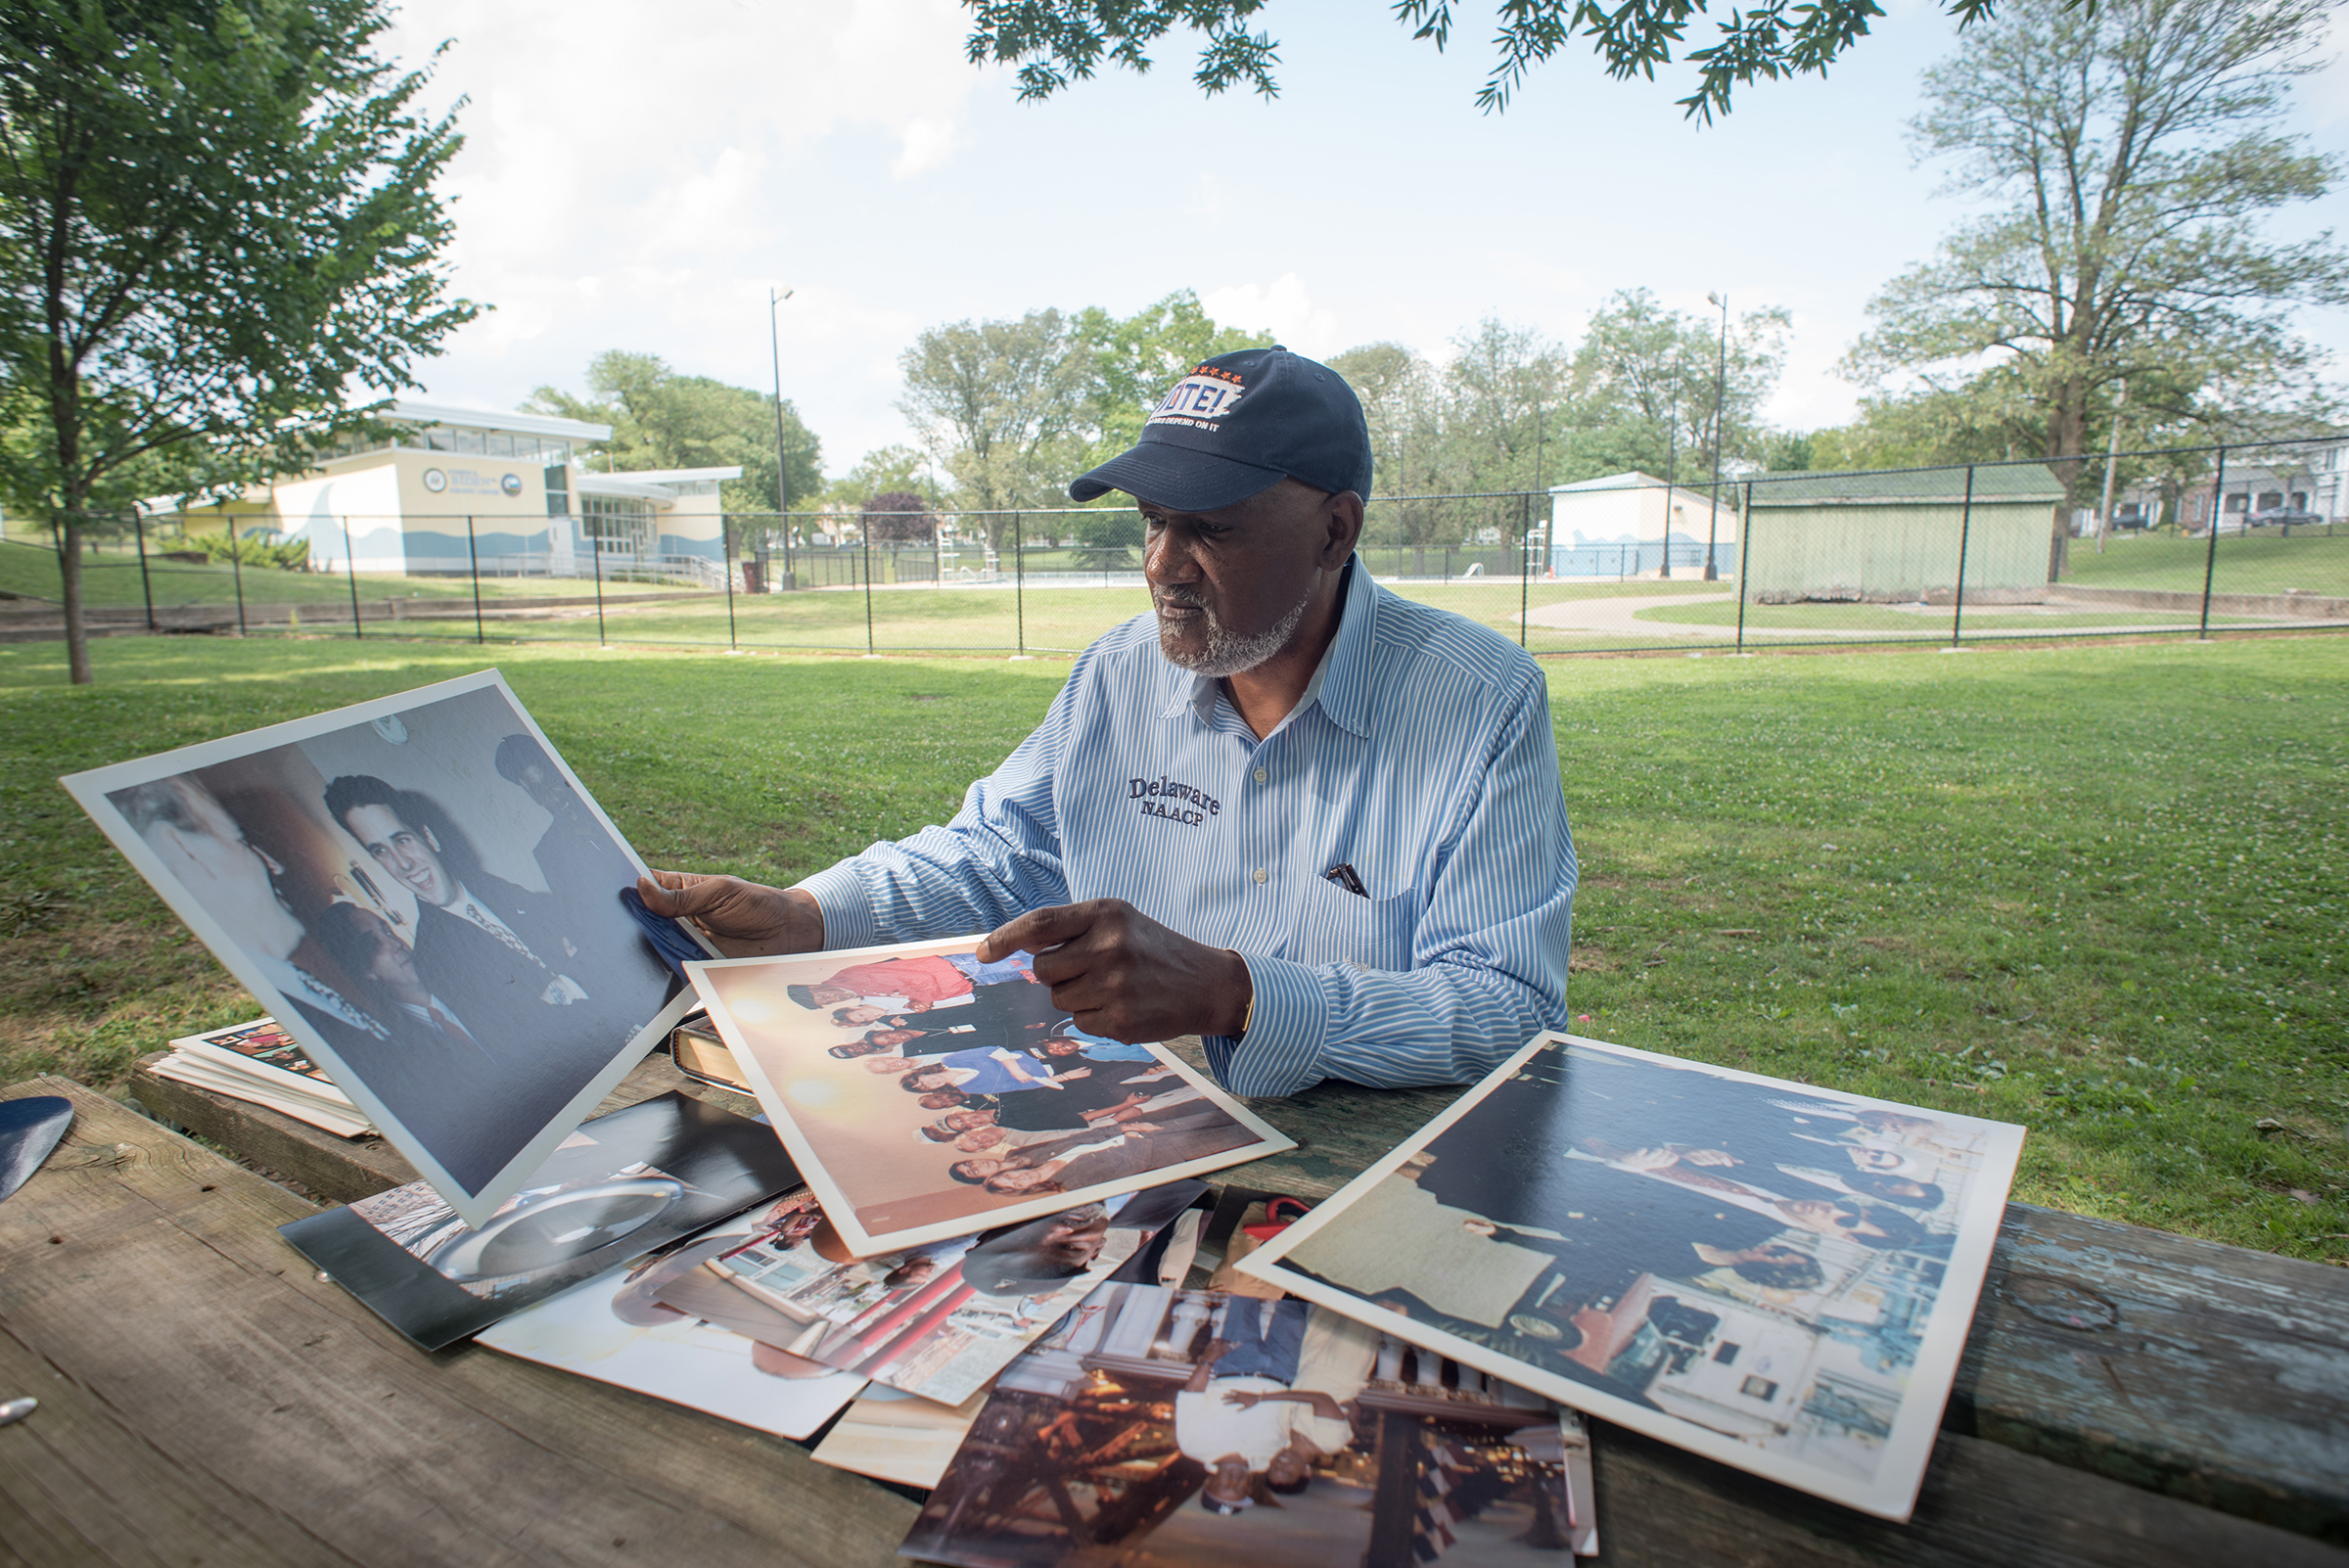 Smith displays some of the photos documenting his work as a Civil Rights leader and his decades long friendship with former Vice President Joe Biden near the pool where they first met as young men in Wilmington, Del. on July 07, 2019